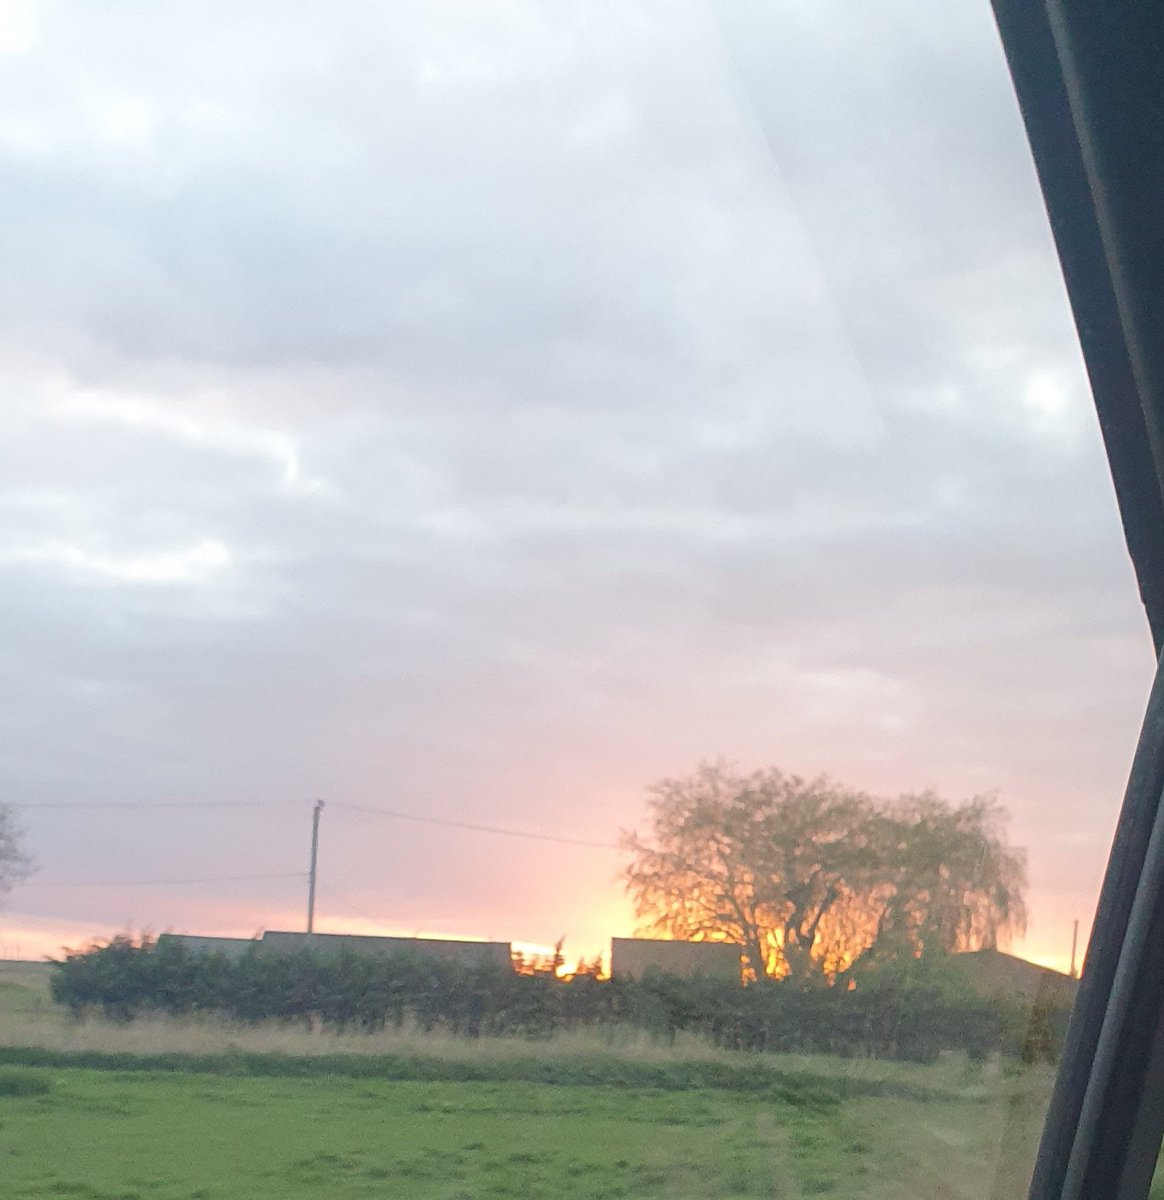 Pretty sky on our drive home tonight! #sunset #nature #MentalHealthMatters #bearswithjobs #Cambridgeshire #UK #spring